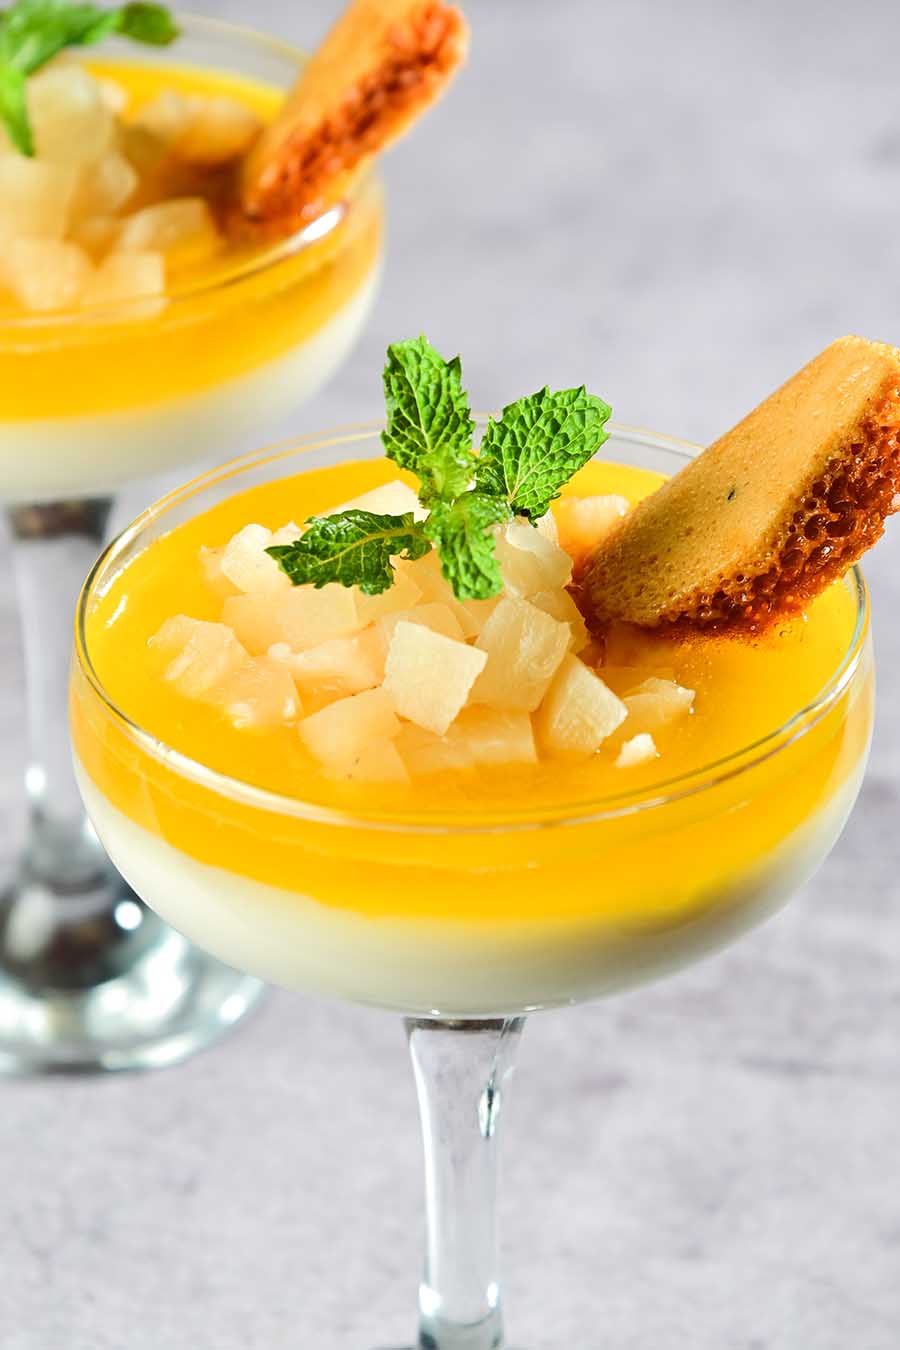 Classic tropical flavours of coconut and pineapple come together in a delightful summer-perfect concoction. The layered Coconut Pineapple Panna Cotta features velvety white chocolate and coconut panna cotta, and the fresh flavours of a pineapple jelly, all dressed with a special honeycomb biscotti